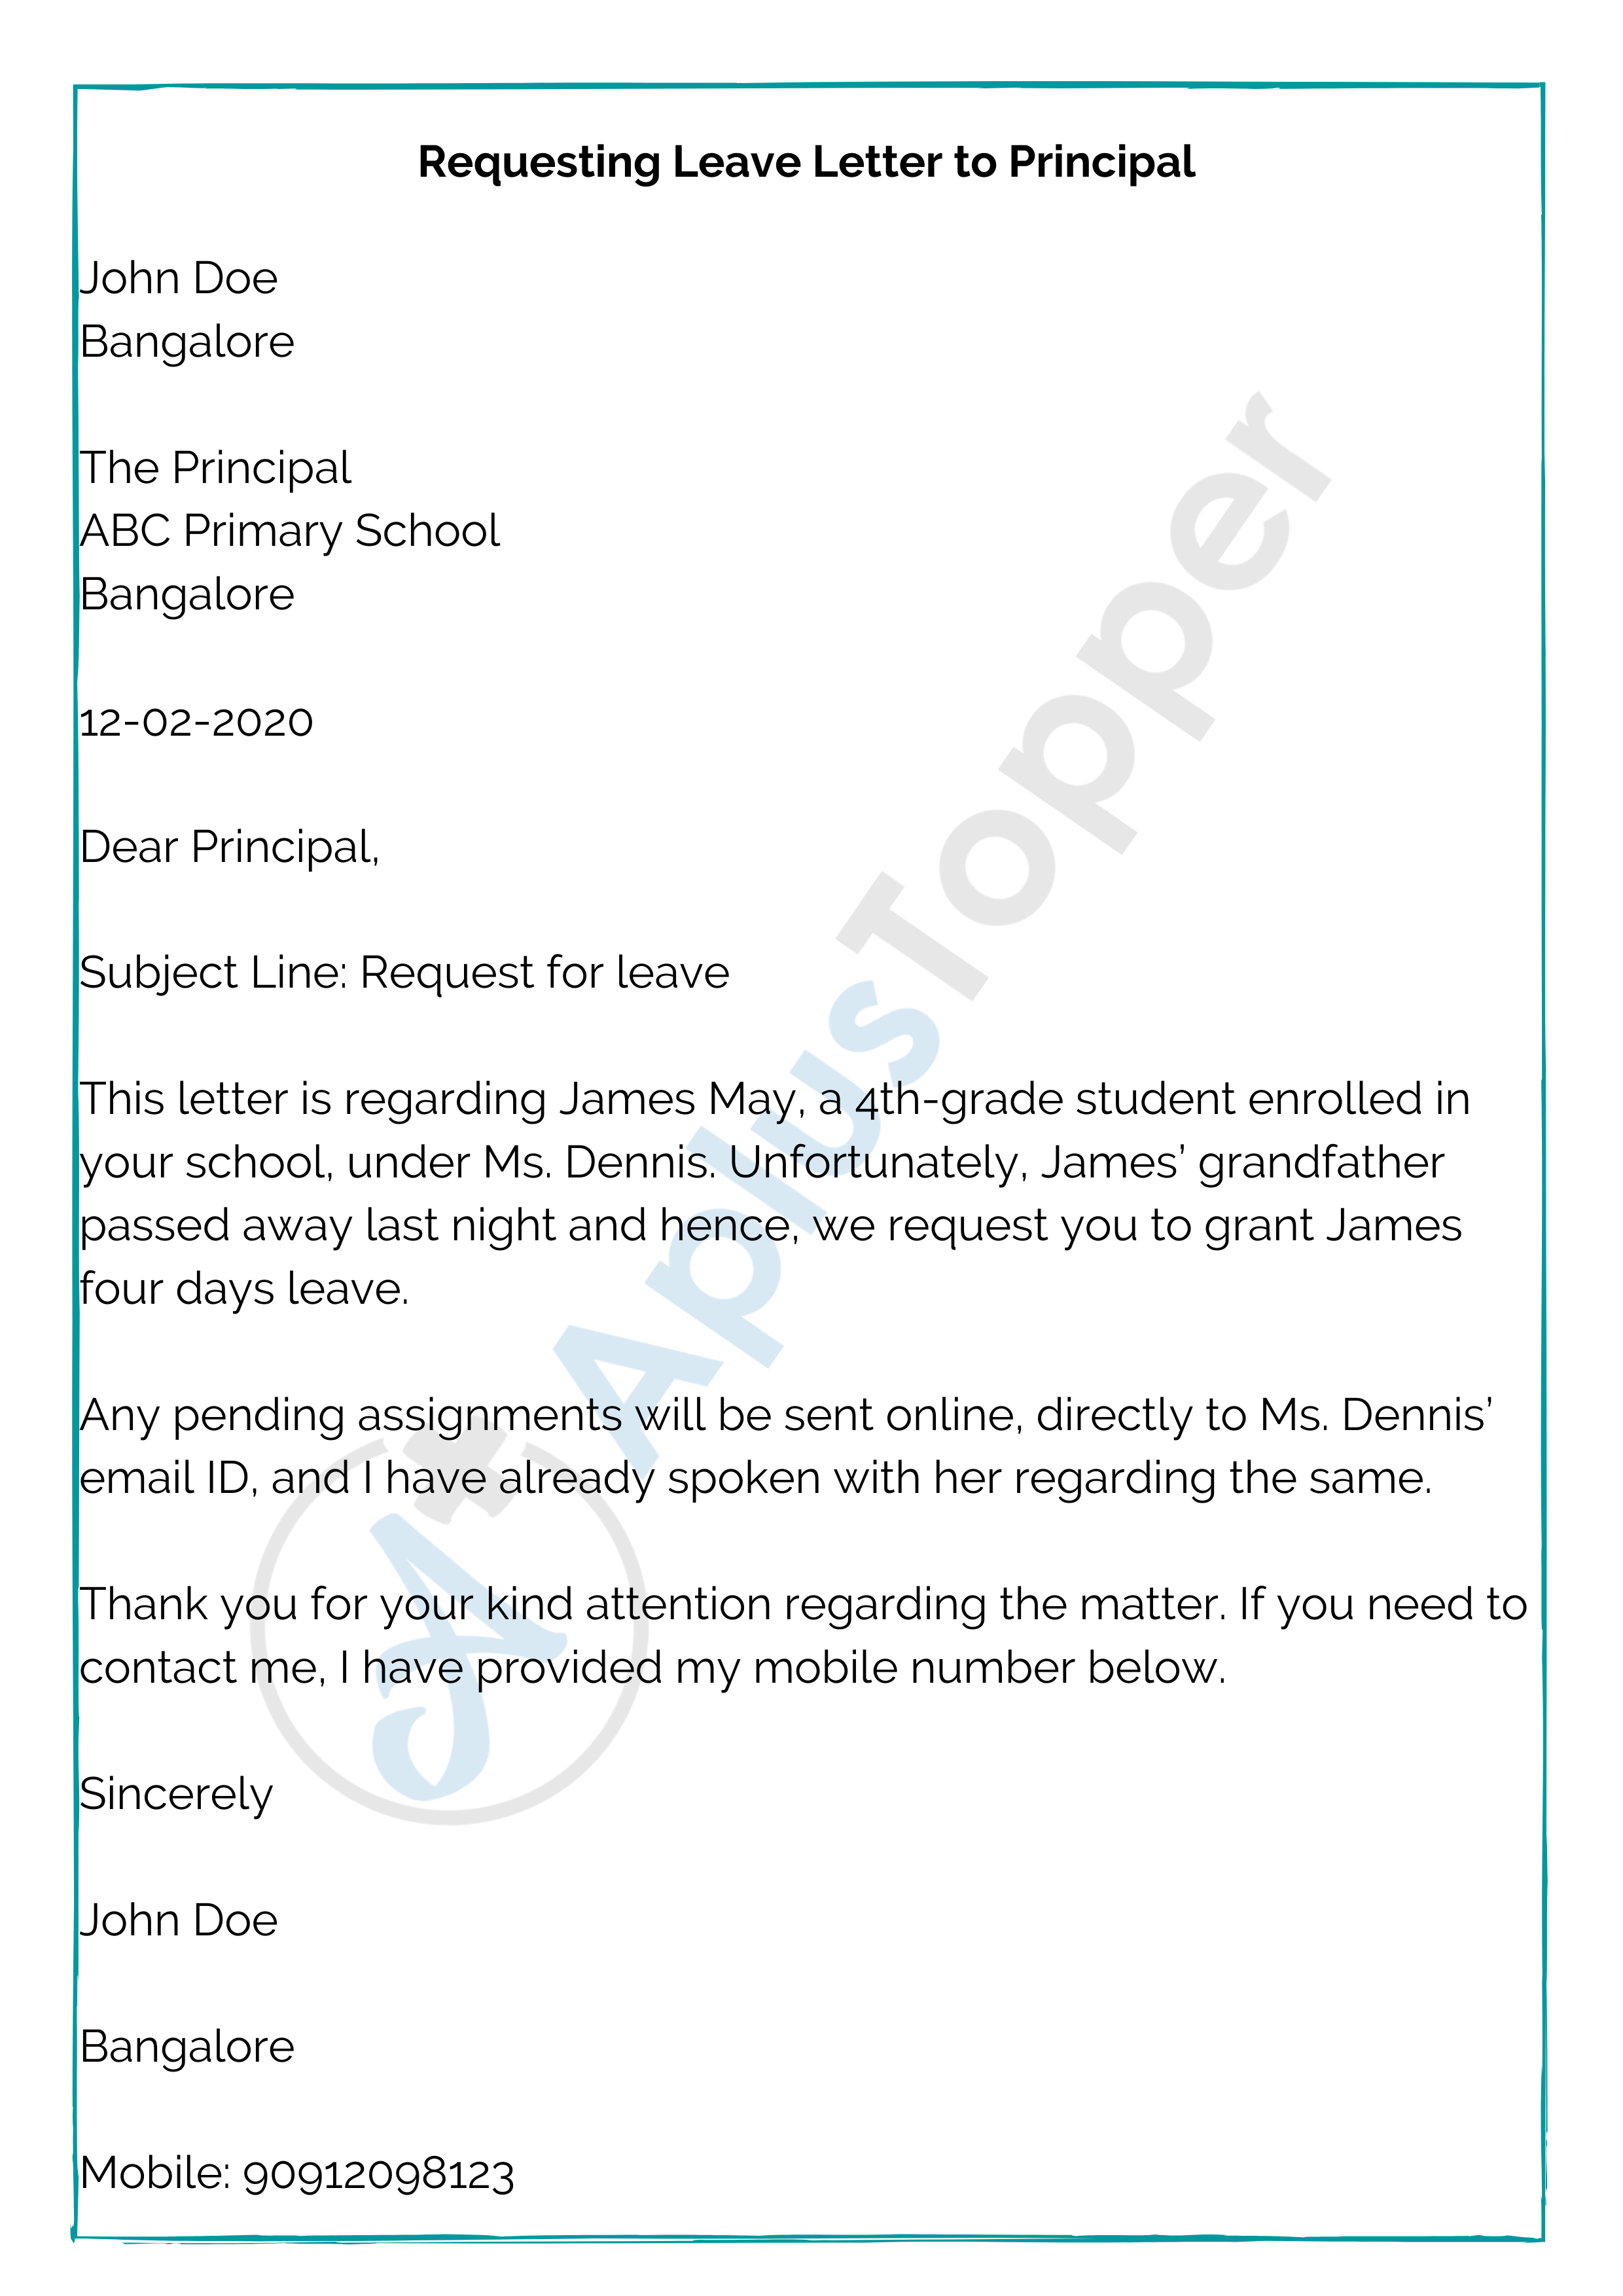 Requesting Leave Letter to Principal